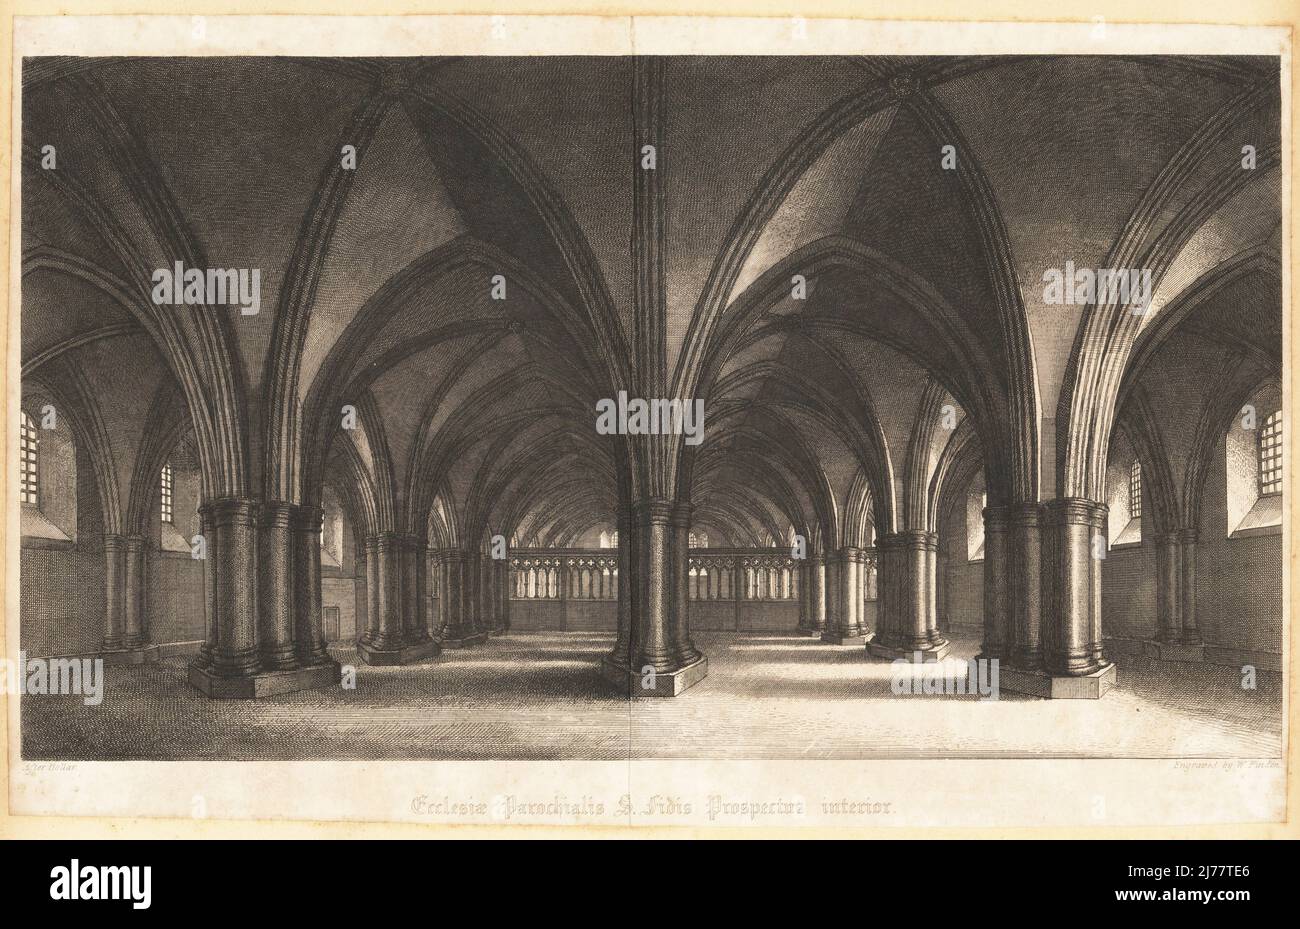 View of St Faith's Church in the crypt of old St Paul's Cathedral, London, 1657. Ecclesiae Parochialis S. Fidis Prospectus. Copperplate engraving by W. Finden after an etching by Wenceslaus Hollar, London, late 18th century. Stock Photo